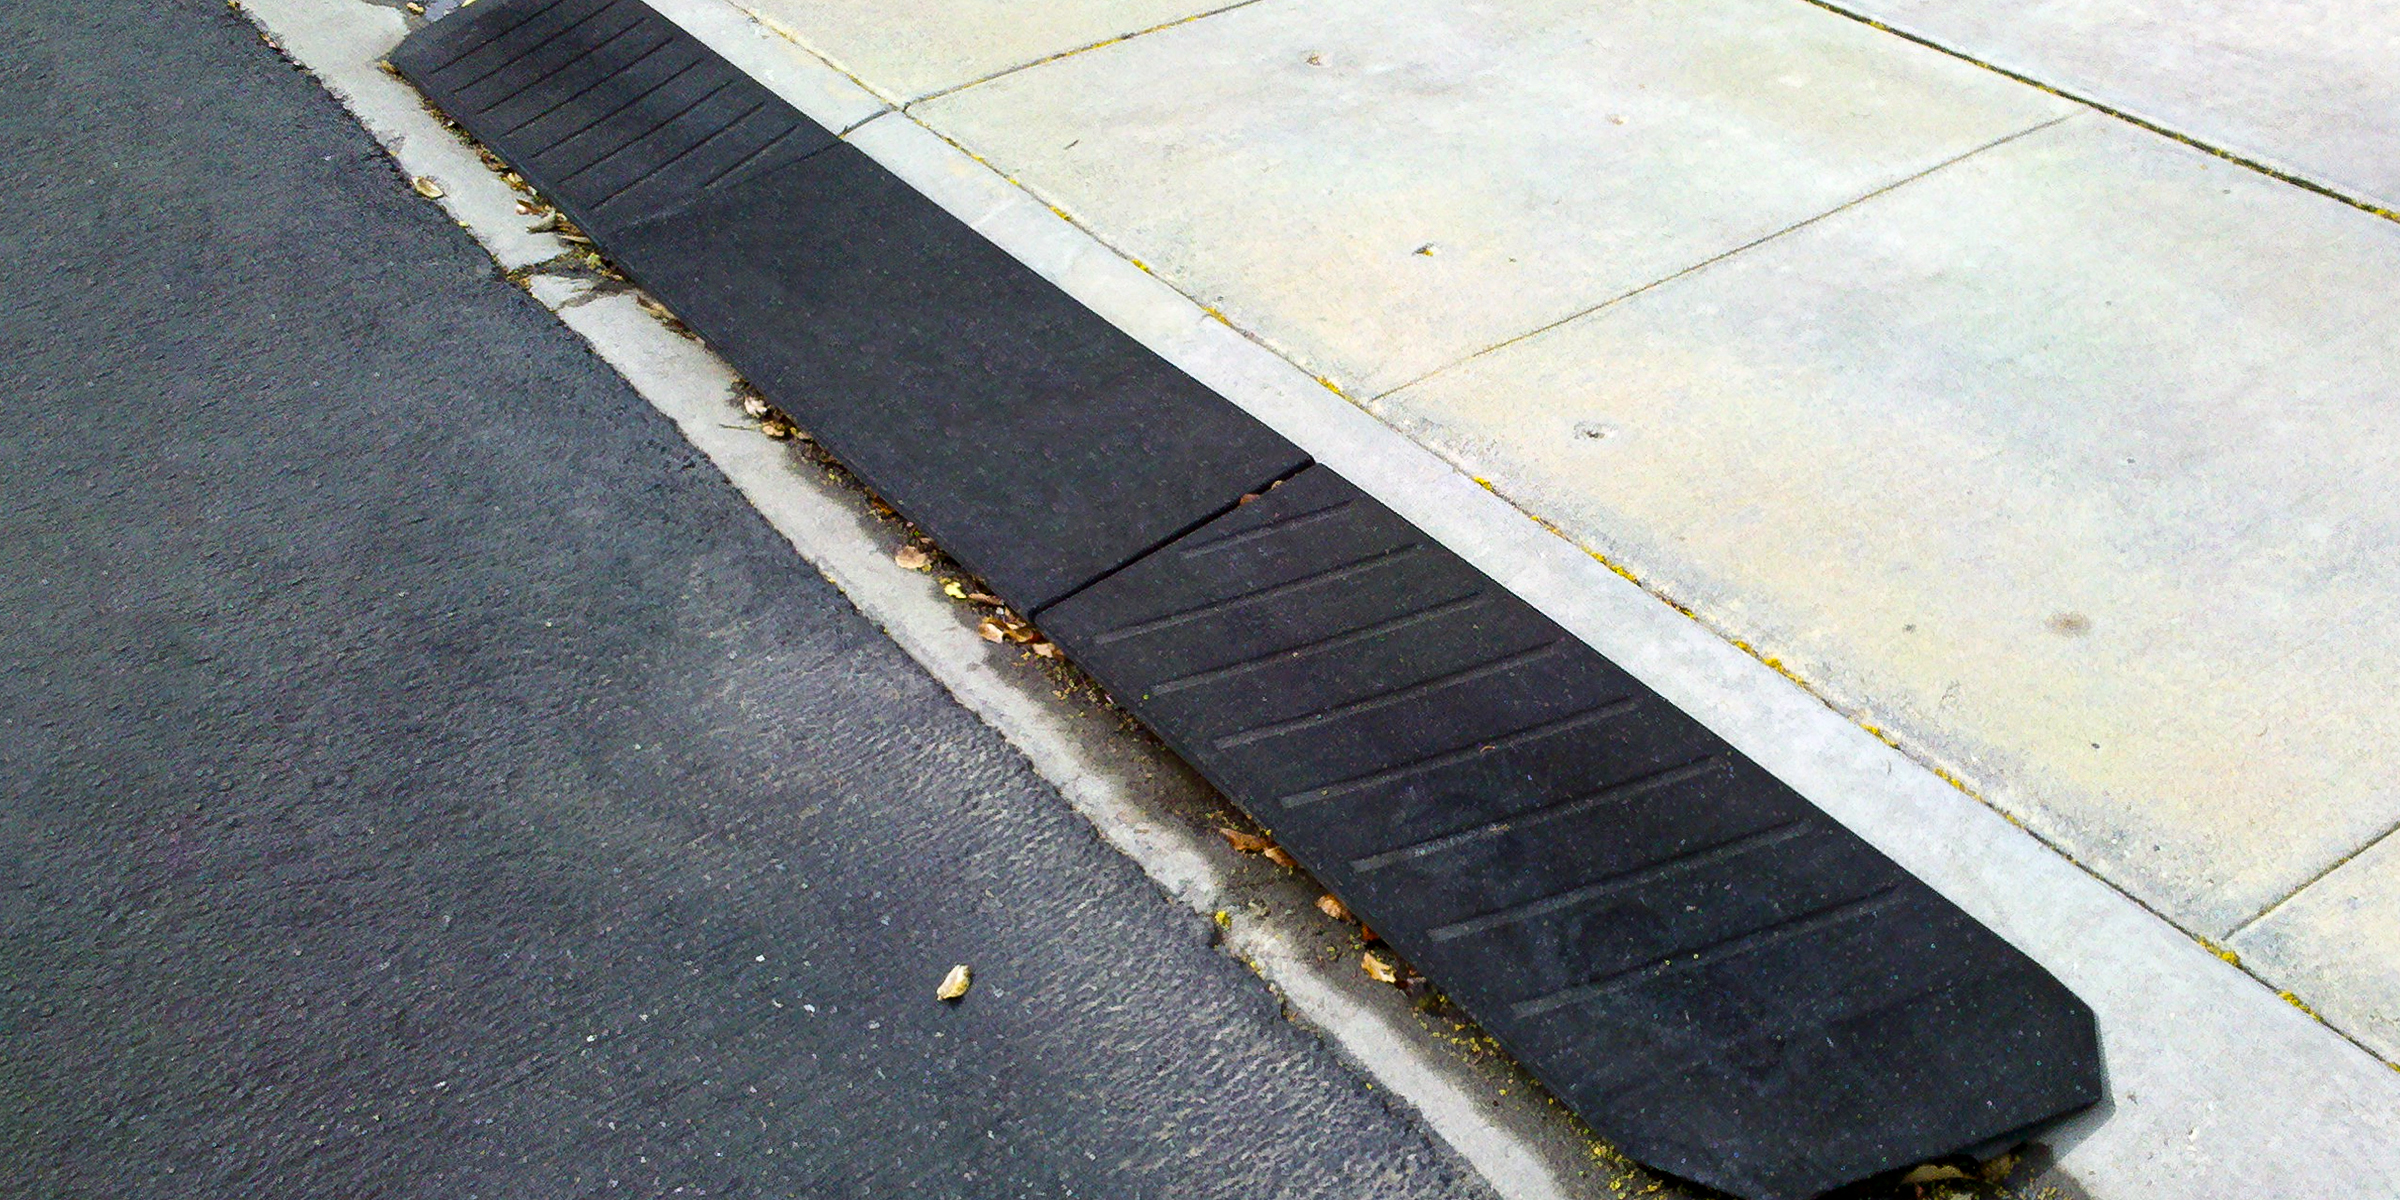 A rubber curb ramp | Source: Flickr/Howard O. Young/CC BY 2.0